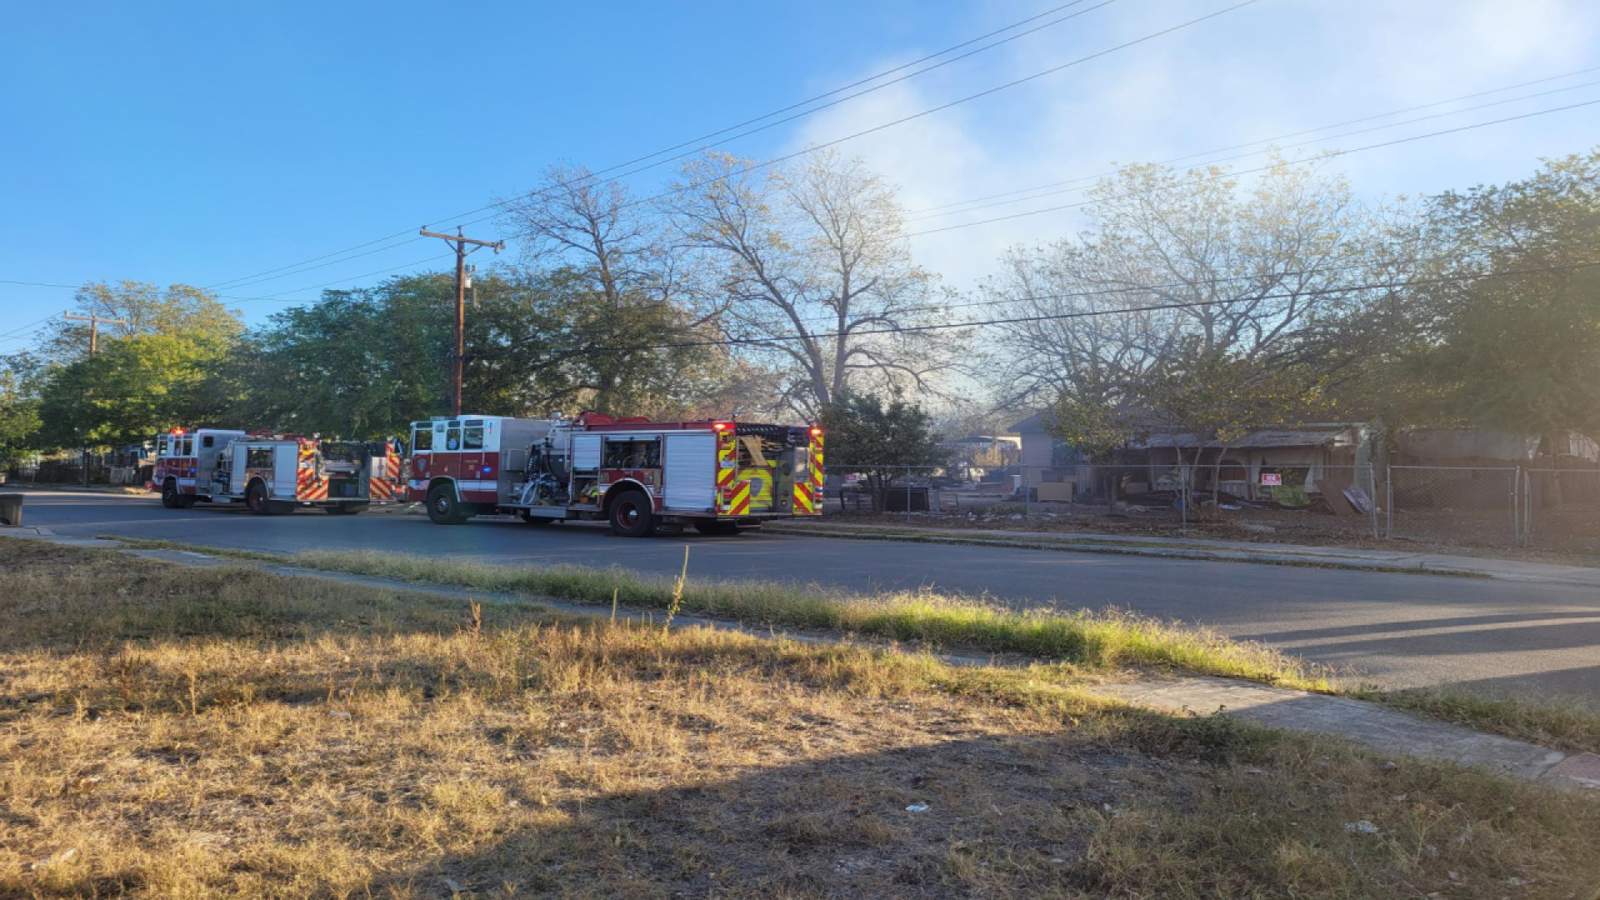 Travel trailer destroyed by early morning fire, SAFD says